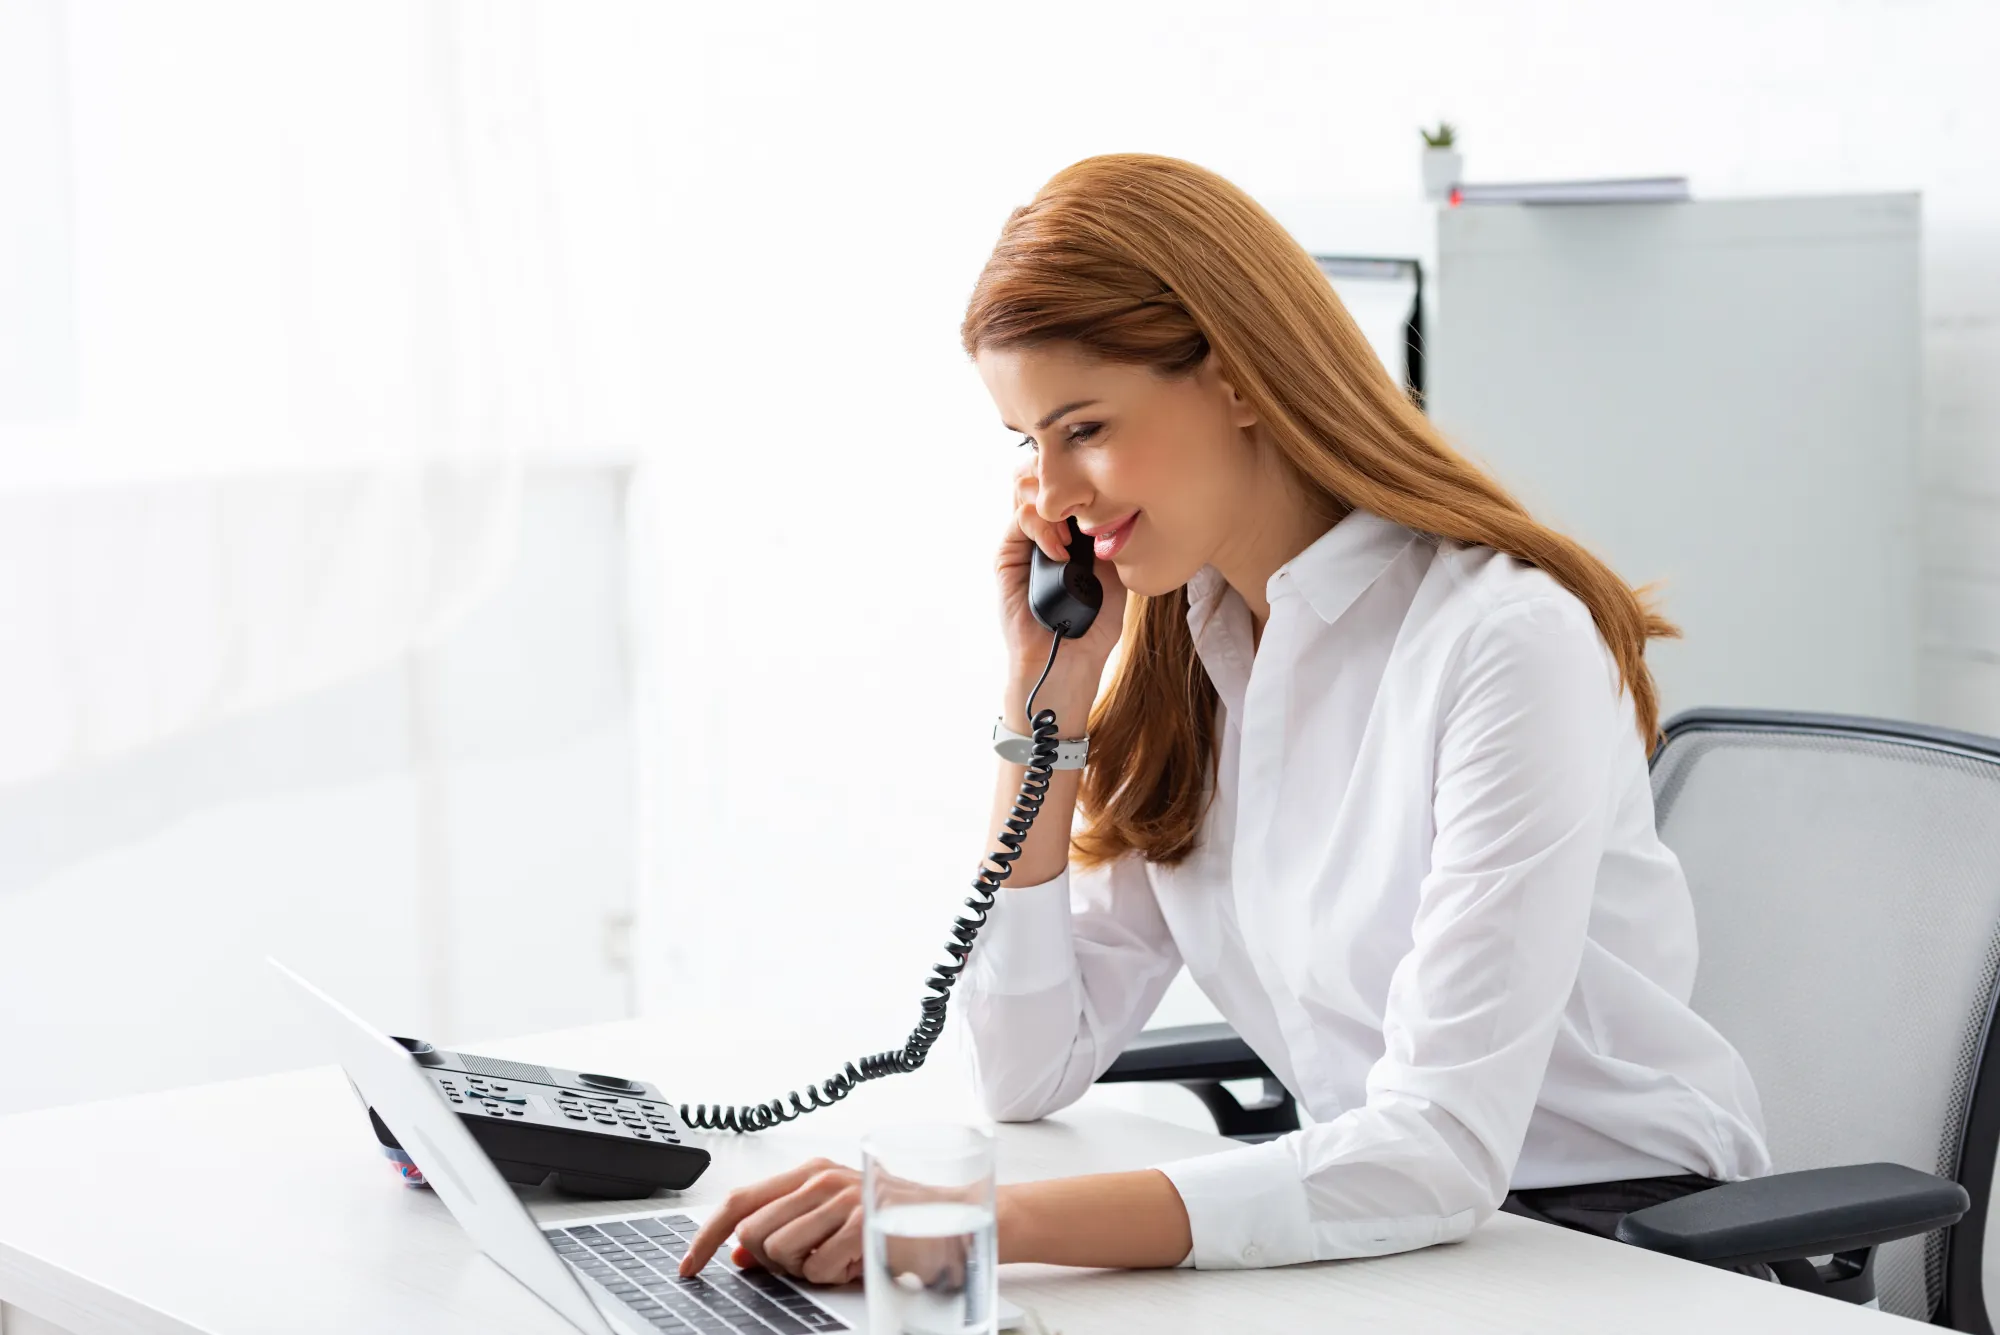 Why should you switch to VoIP?